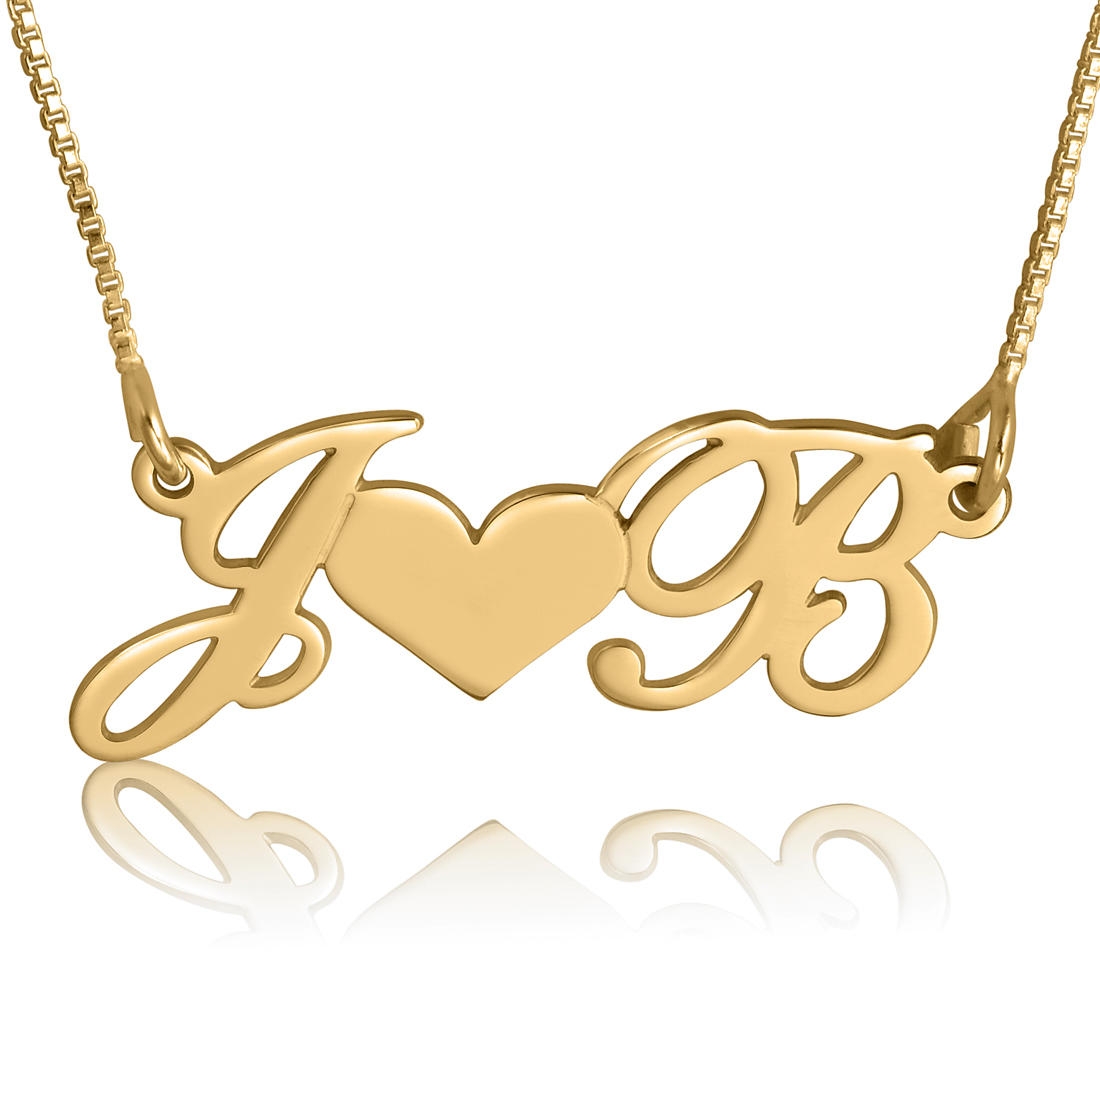 Initials Heart Necklace, 24k Gold Plated, Two Letters